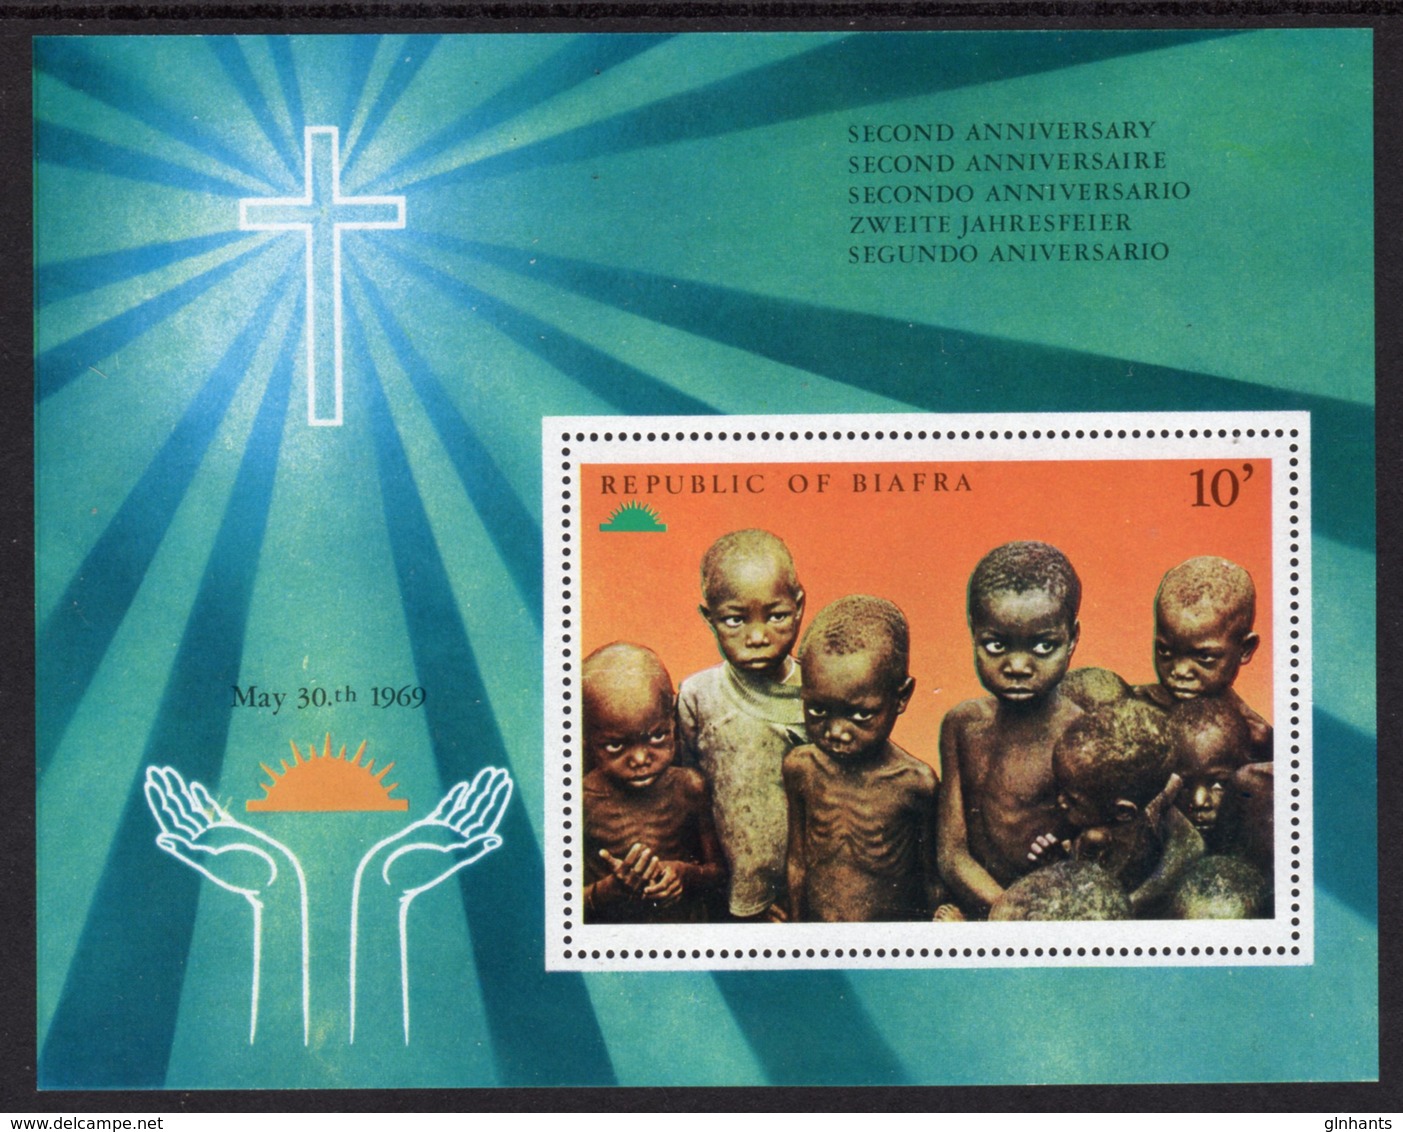 NIGERIA BIAFRA - 1969 2nd ANNIVERSARY OF INDEPENDENCE MS MNH ** - REDUCED PRICE TINY BEND TOP RIGHT - Nigeria (1961-...)